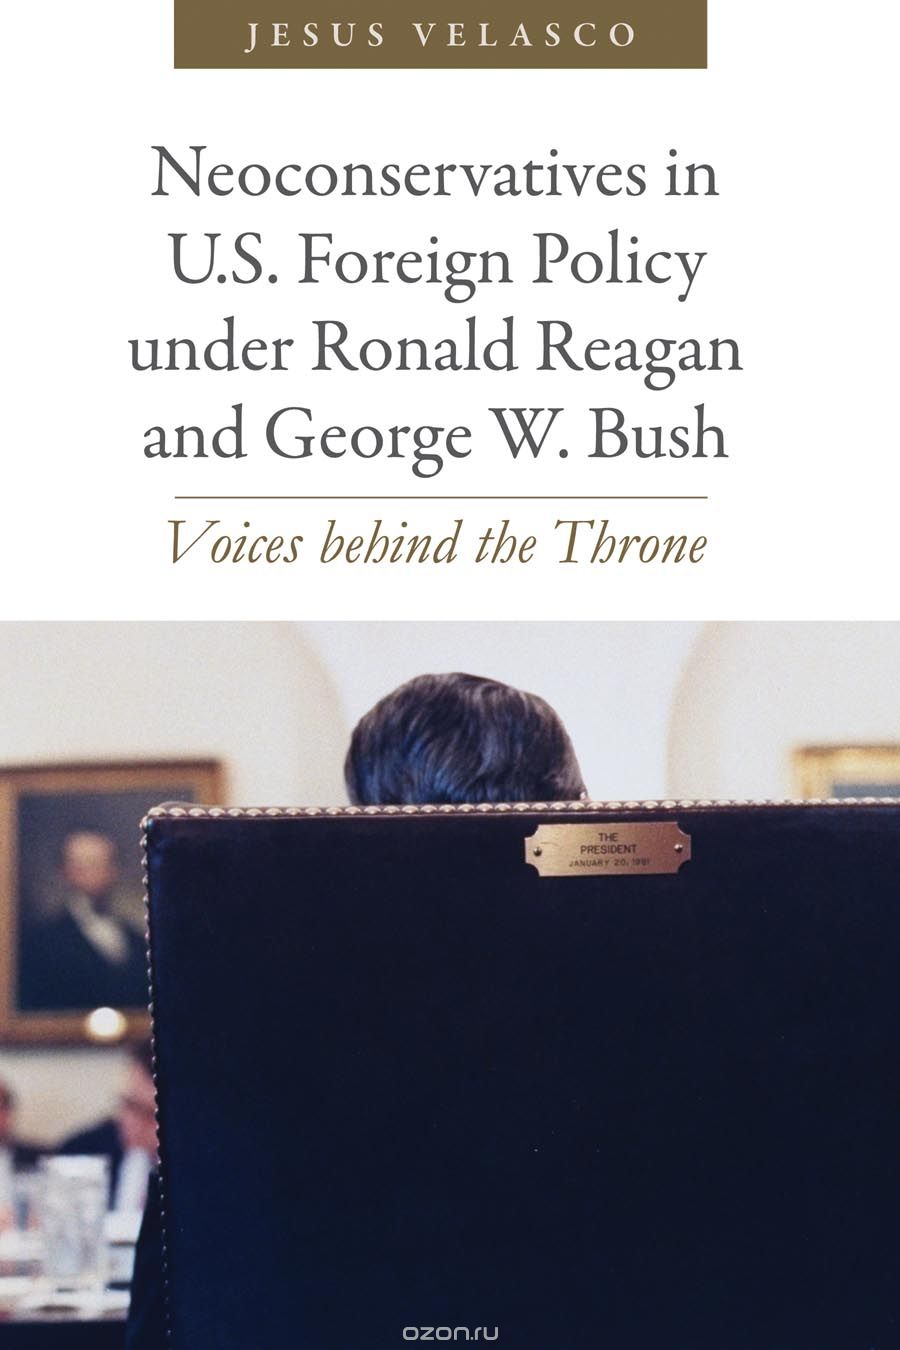 Neoconservatives in U.S. Foreign Policy under Ronald Reagan and George W. Bush –  Voices Behind the Throne